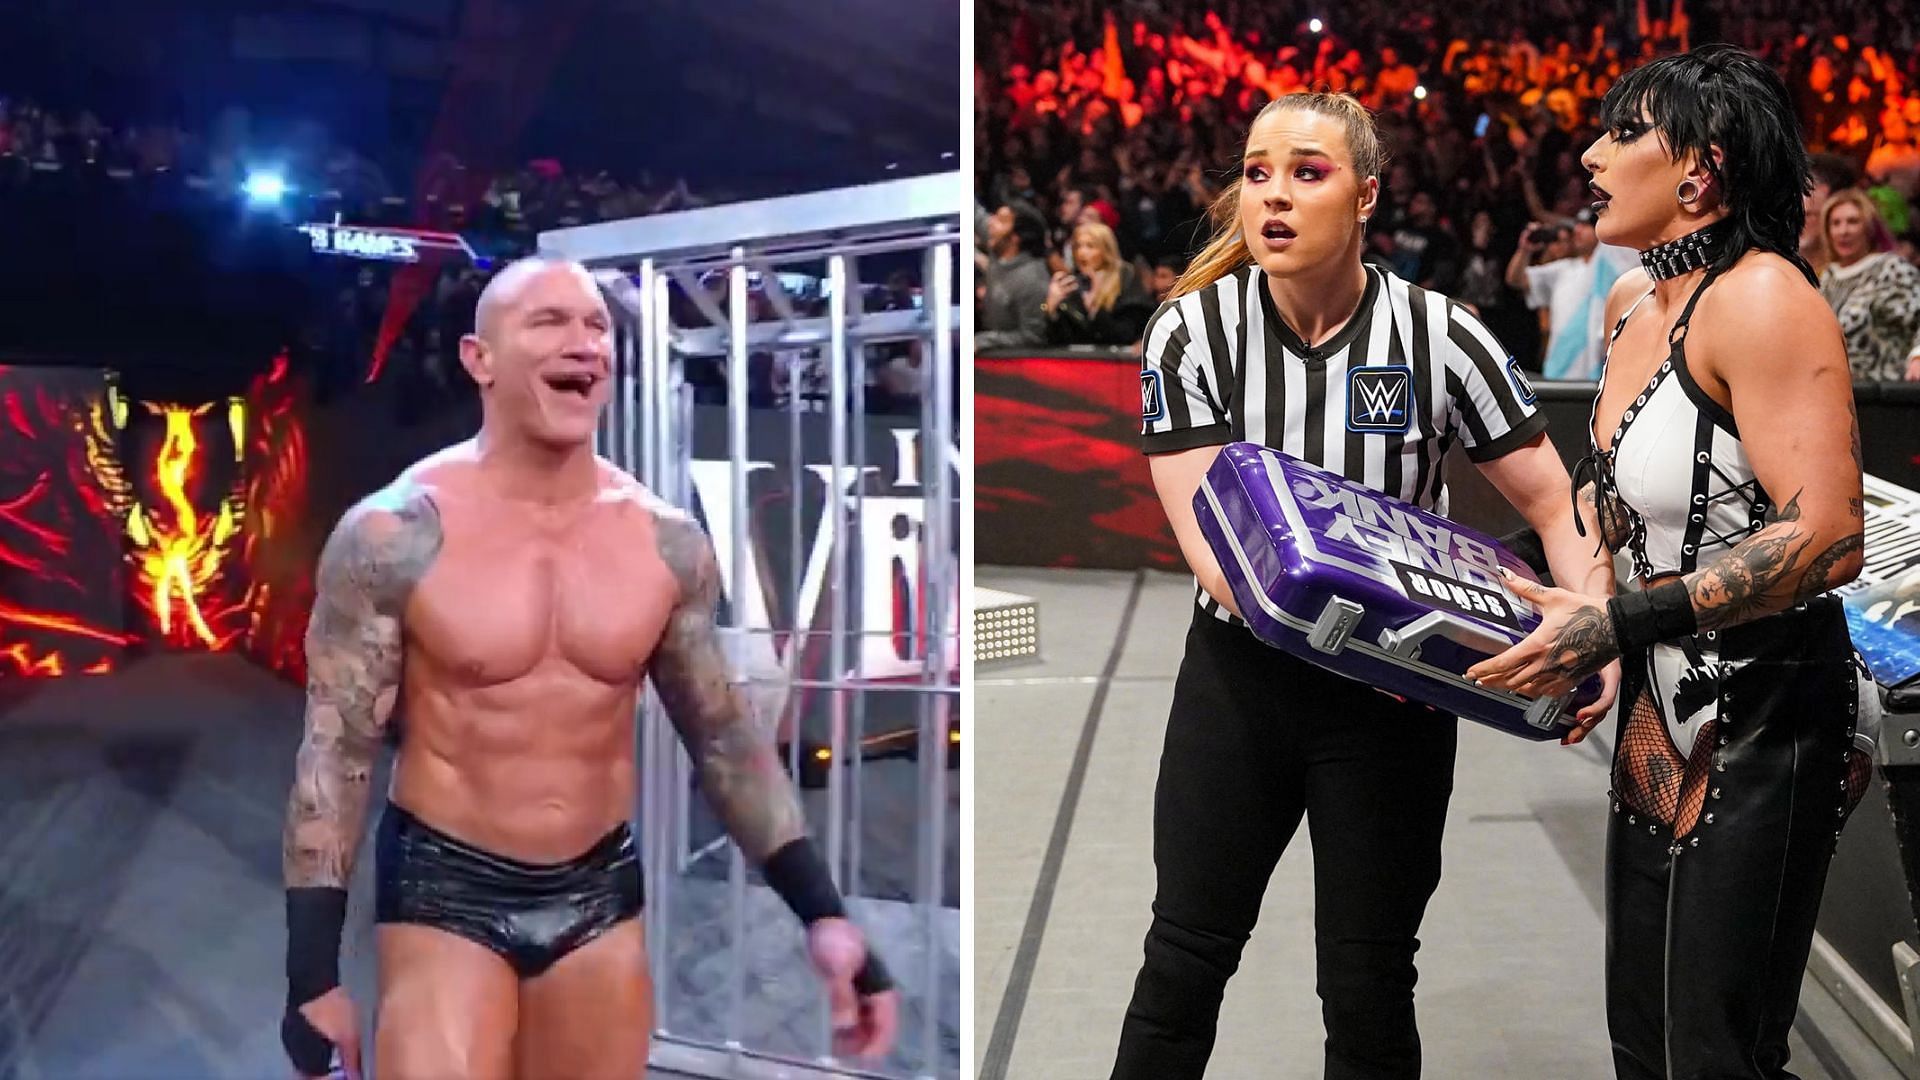 Randy Orton on the left, Rhea Ripley on the right